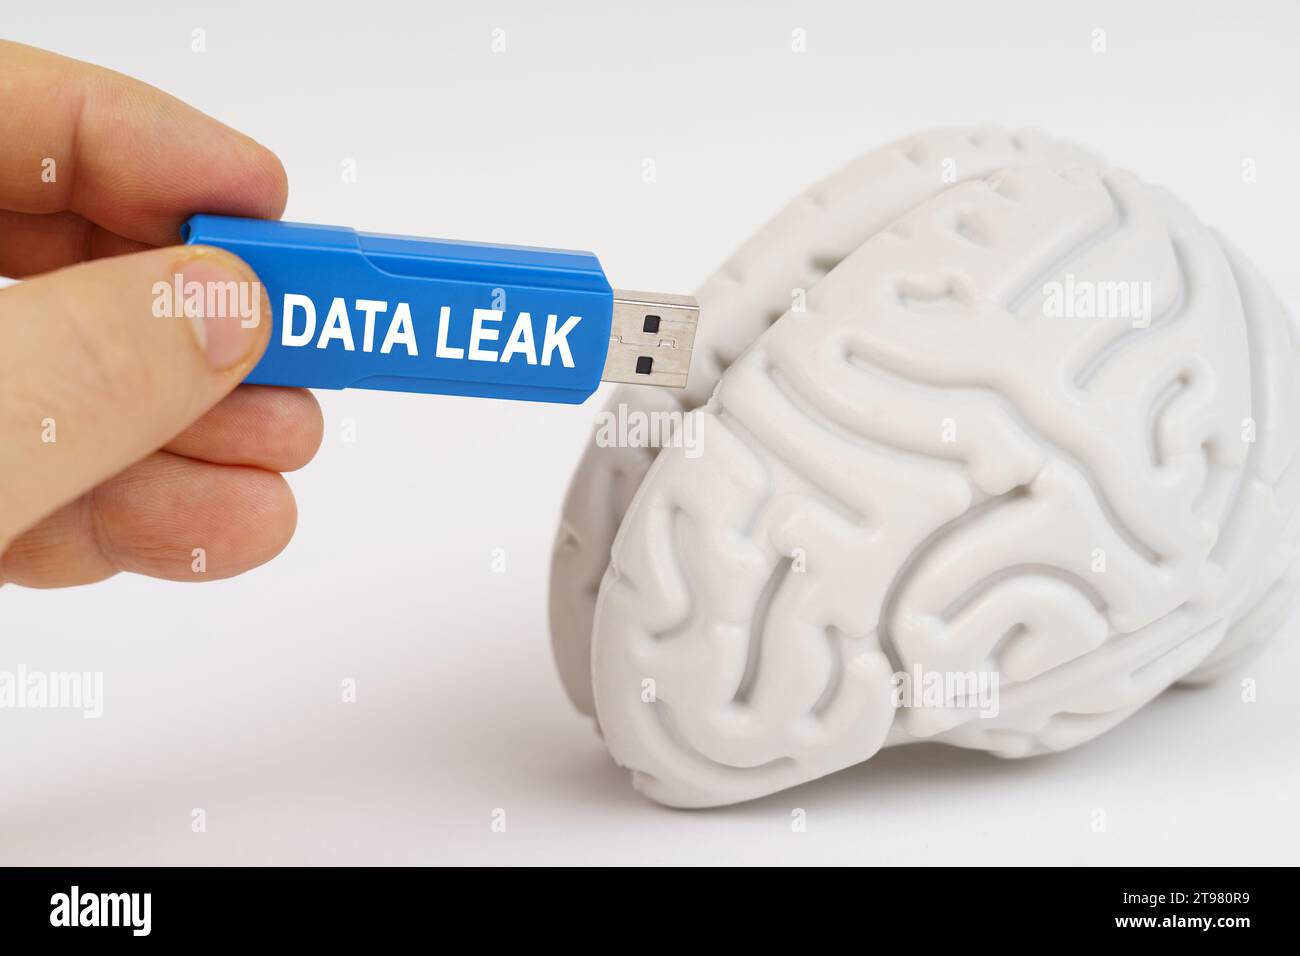 A man inserts a flash drive into his brain with the inscription - DATA LEAK. Science and technology concept. Stock Photo